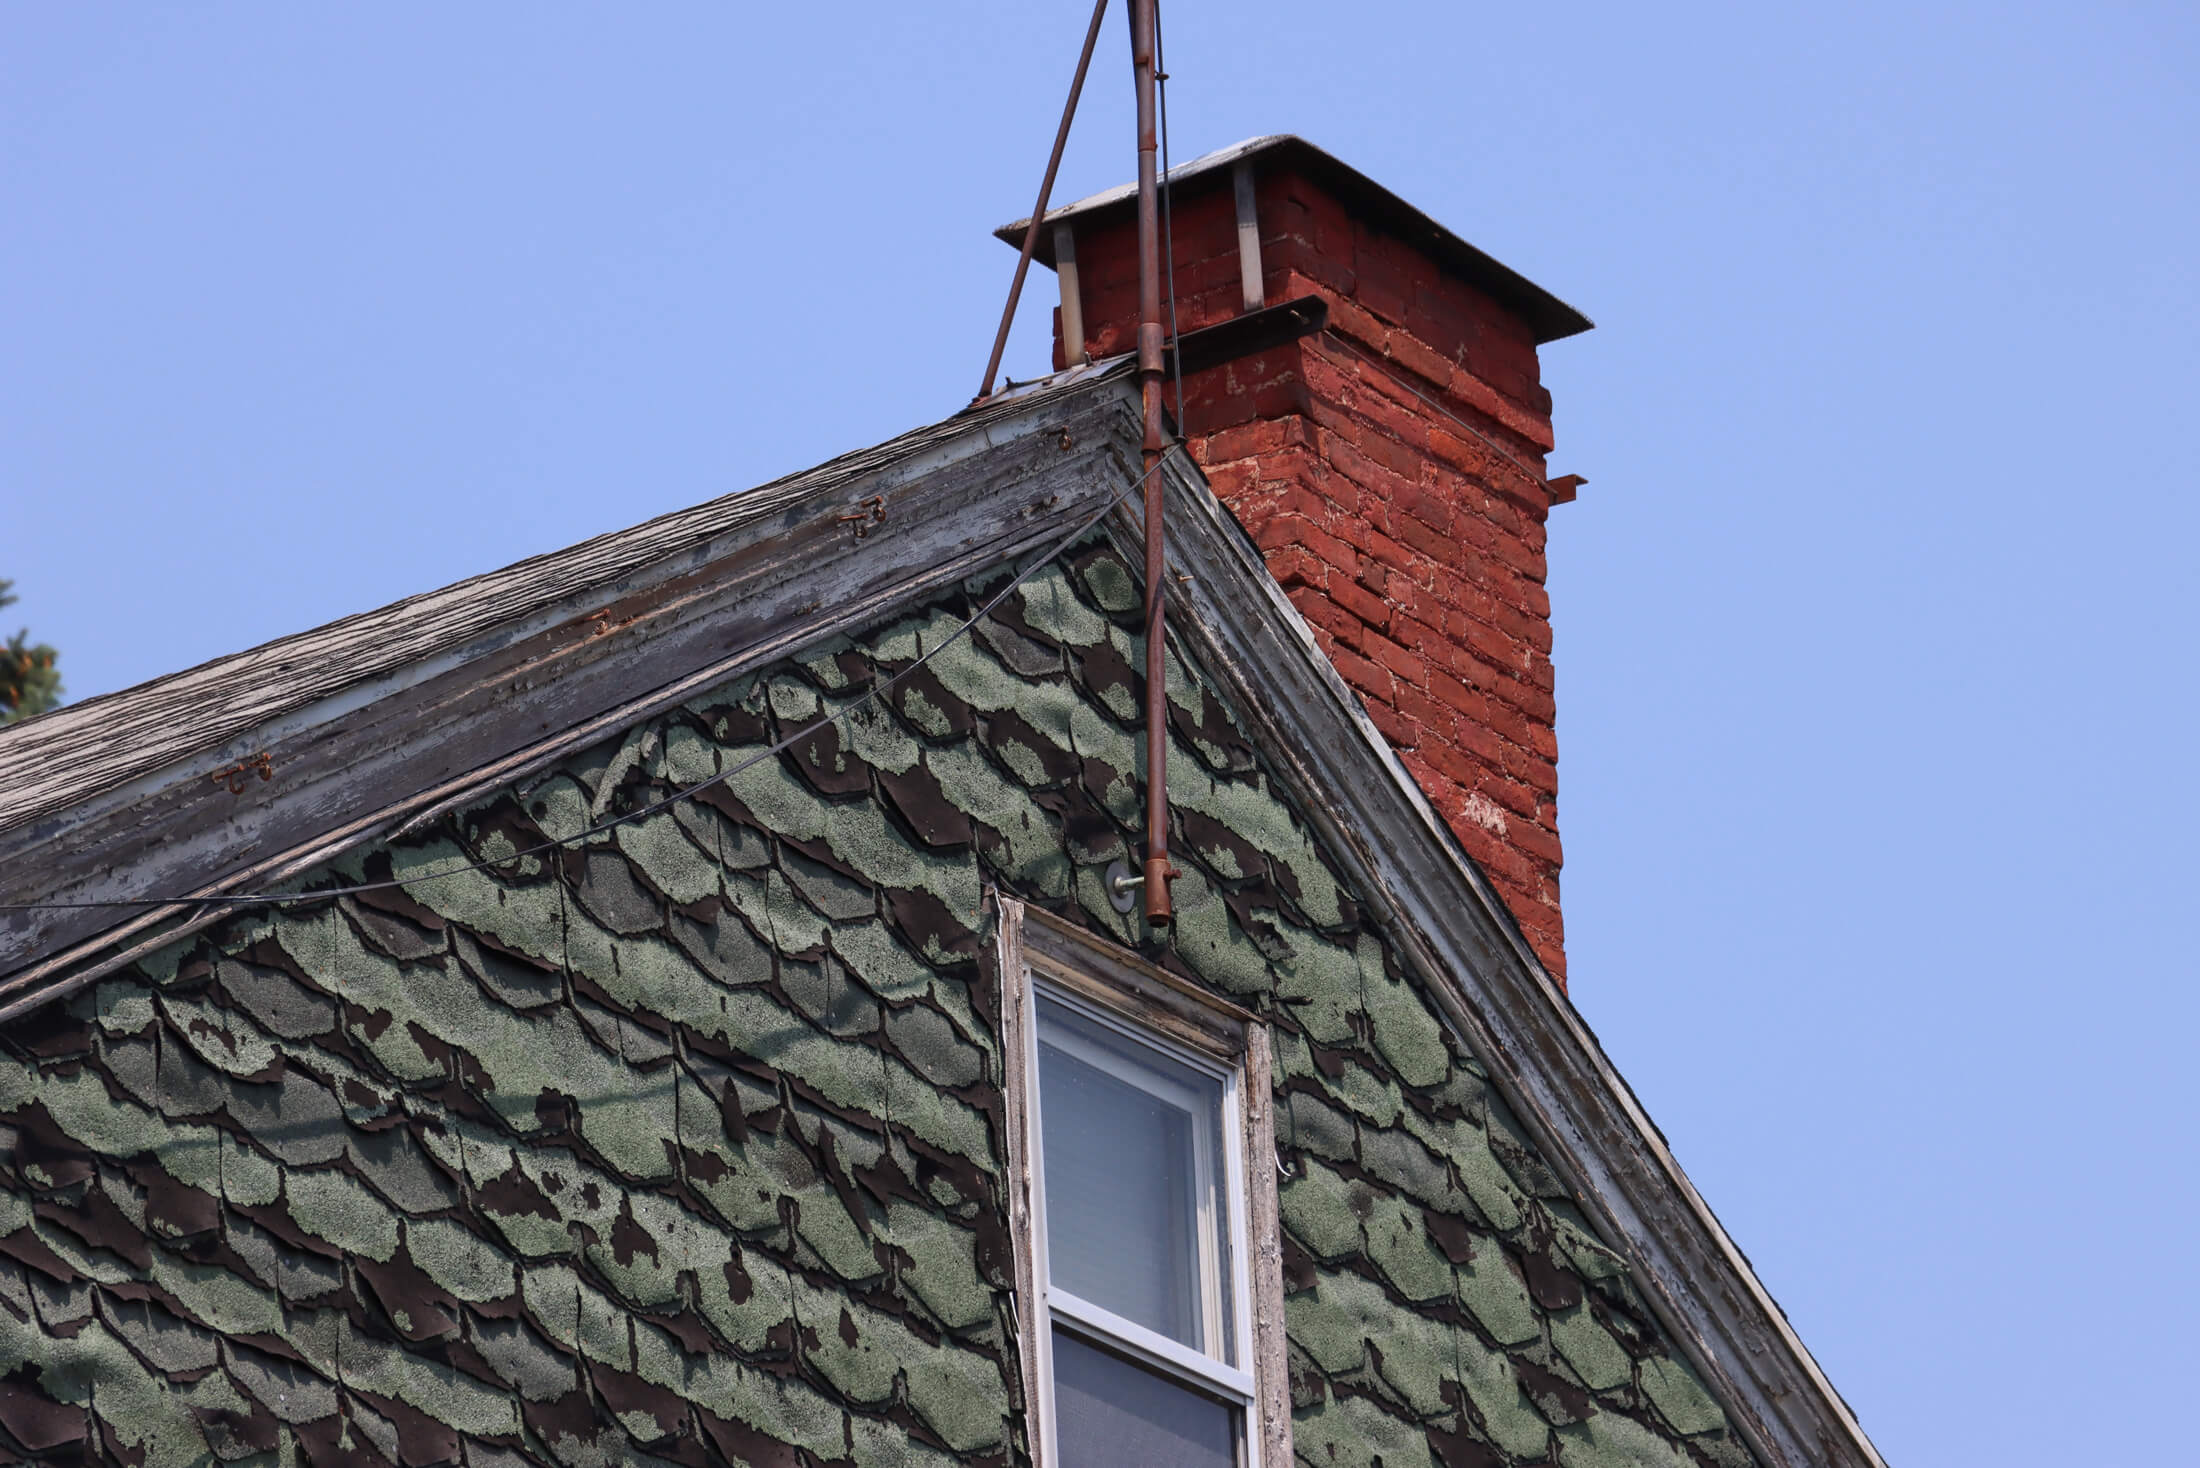 the side gable and a brick chimney